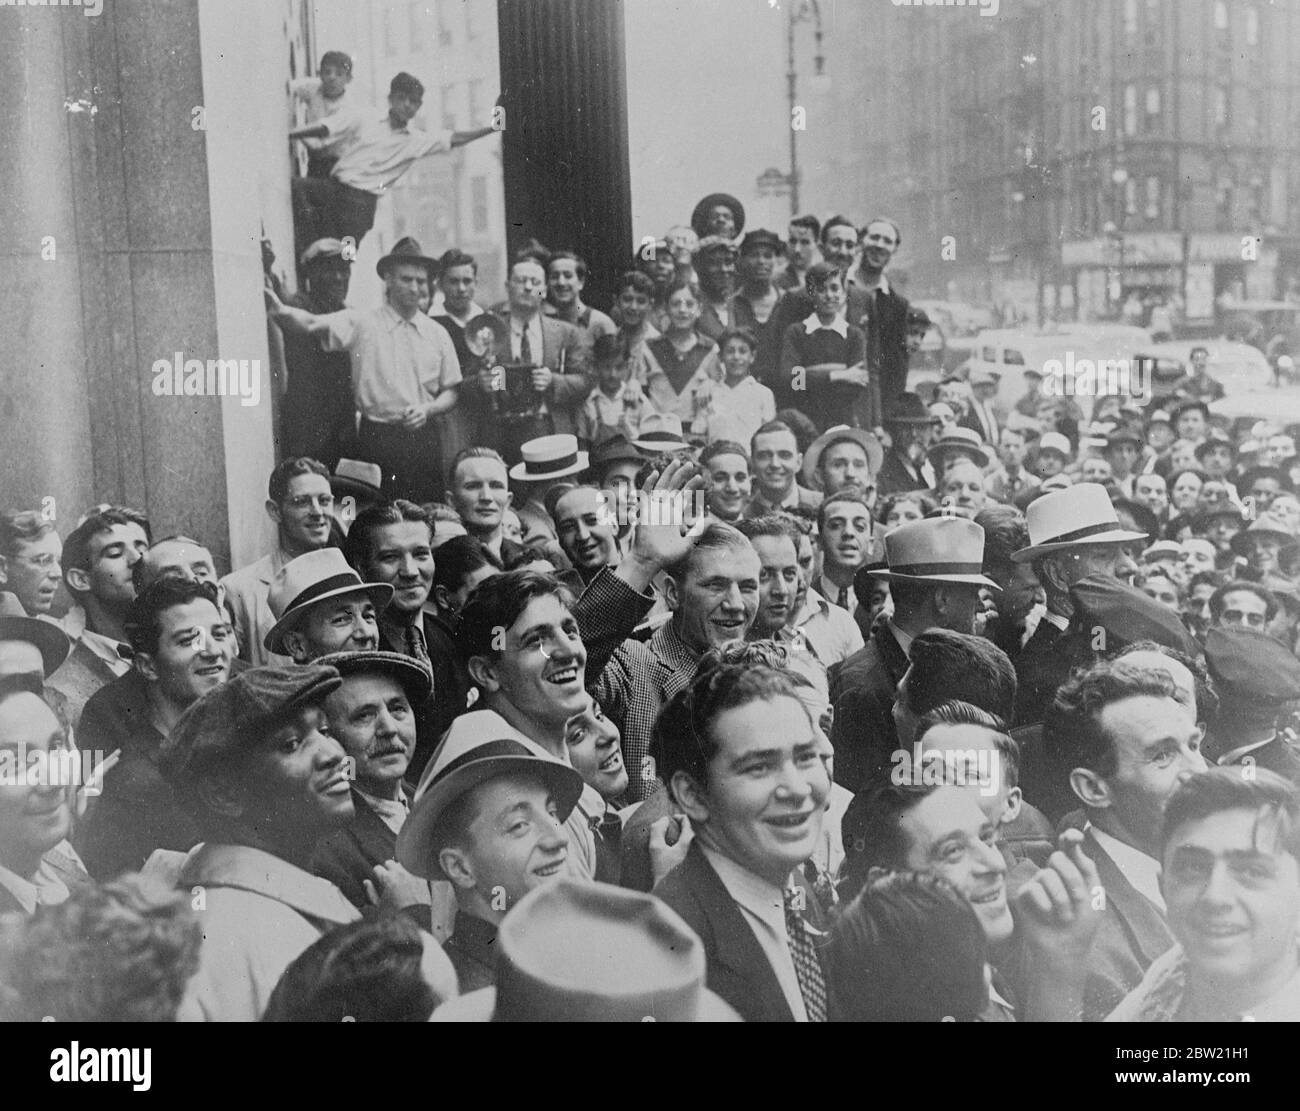 Tommy Farr, the British Empire champion made a gallant but unsuccessful attempt to wrest the world title from Joe Louis, surrounded by crowds outside the State building in New York before the big fight. Far went the whole distance with Louis but lost on points. 1 September 1937 Stock Photo